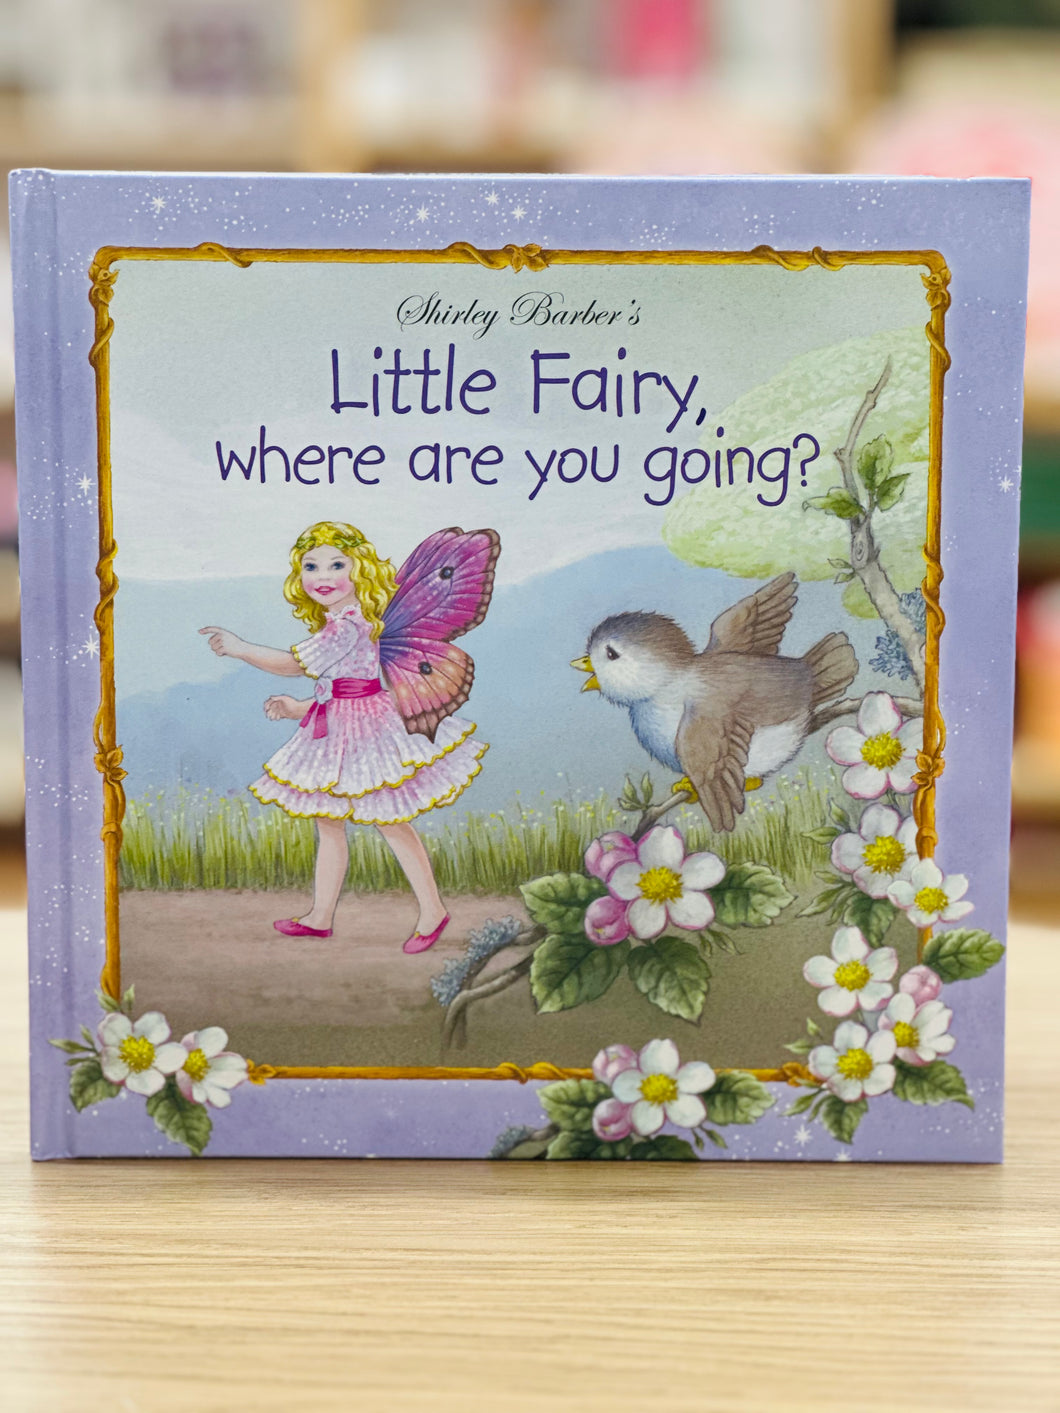 Little Fairy, where are you going?